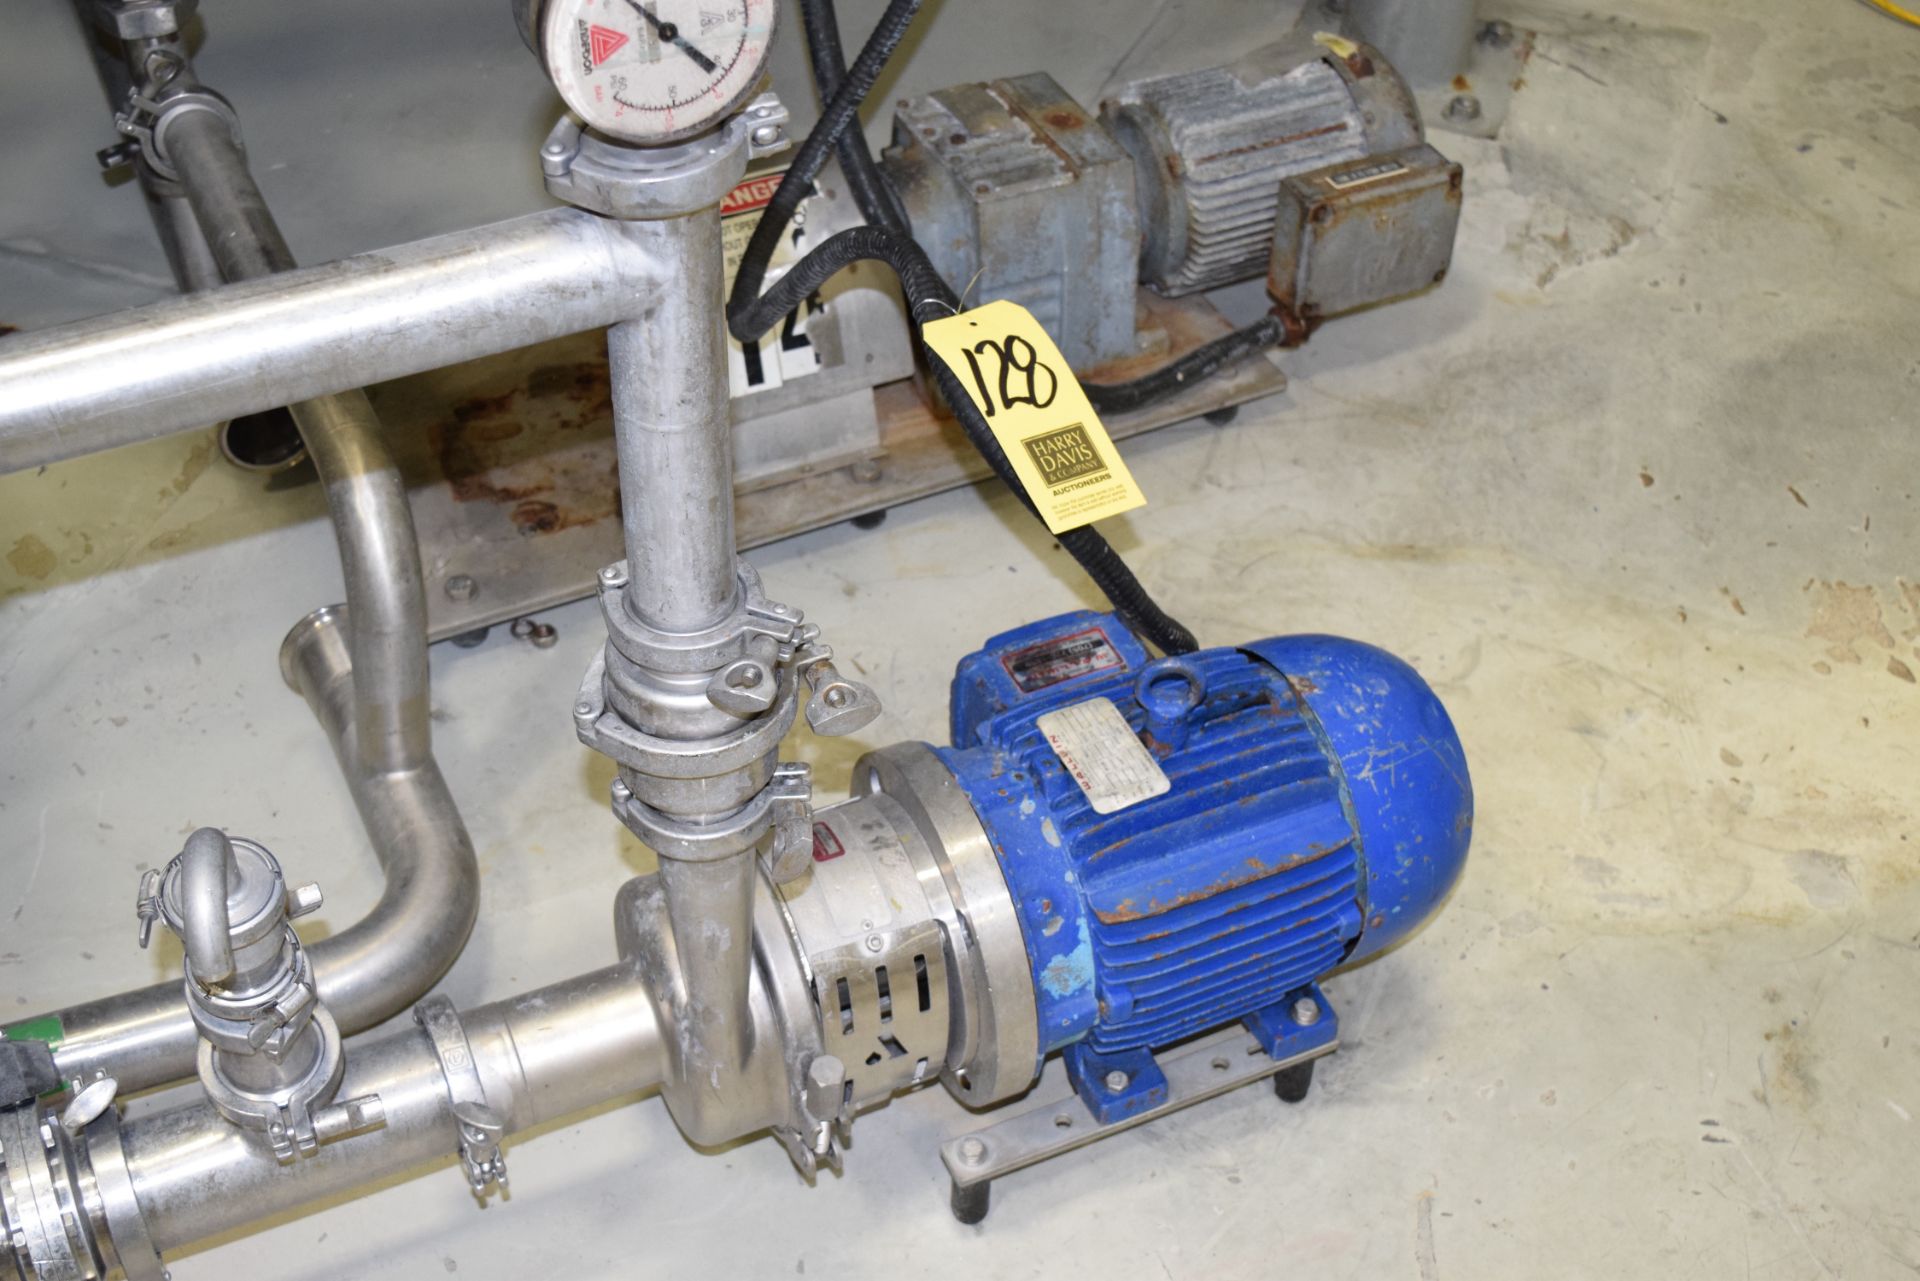 APV 5 HP Pump with Motor and 3" x 2" S/S Head, Clamp Type Rigging Charge:75 Skidding Charge:25